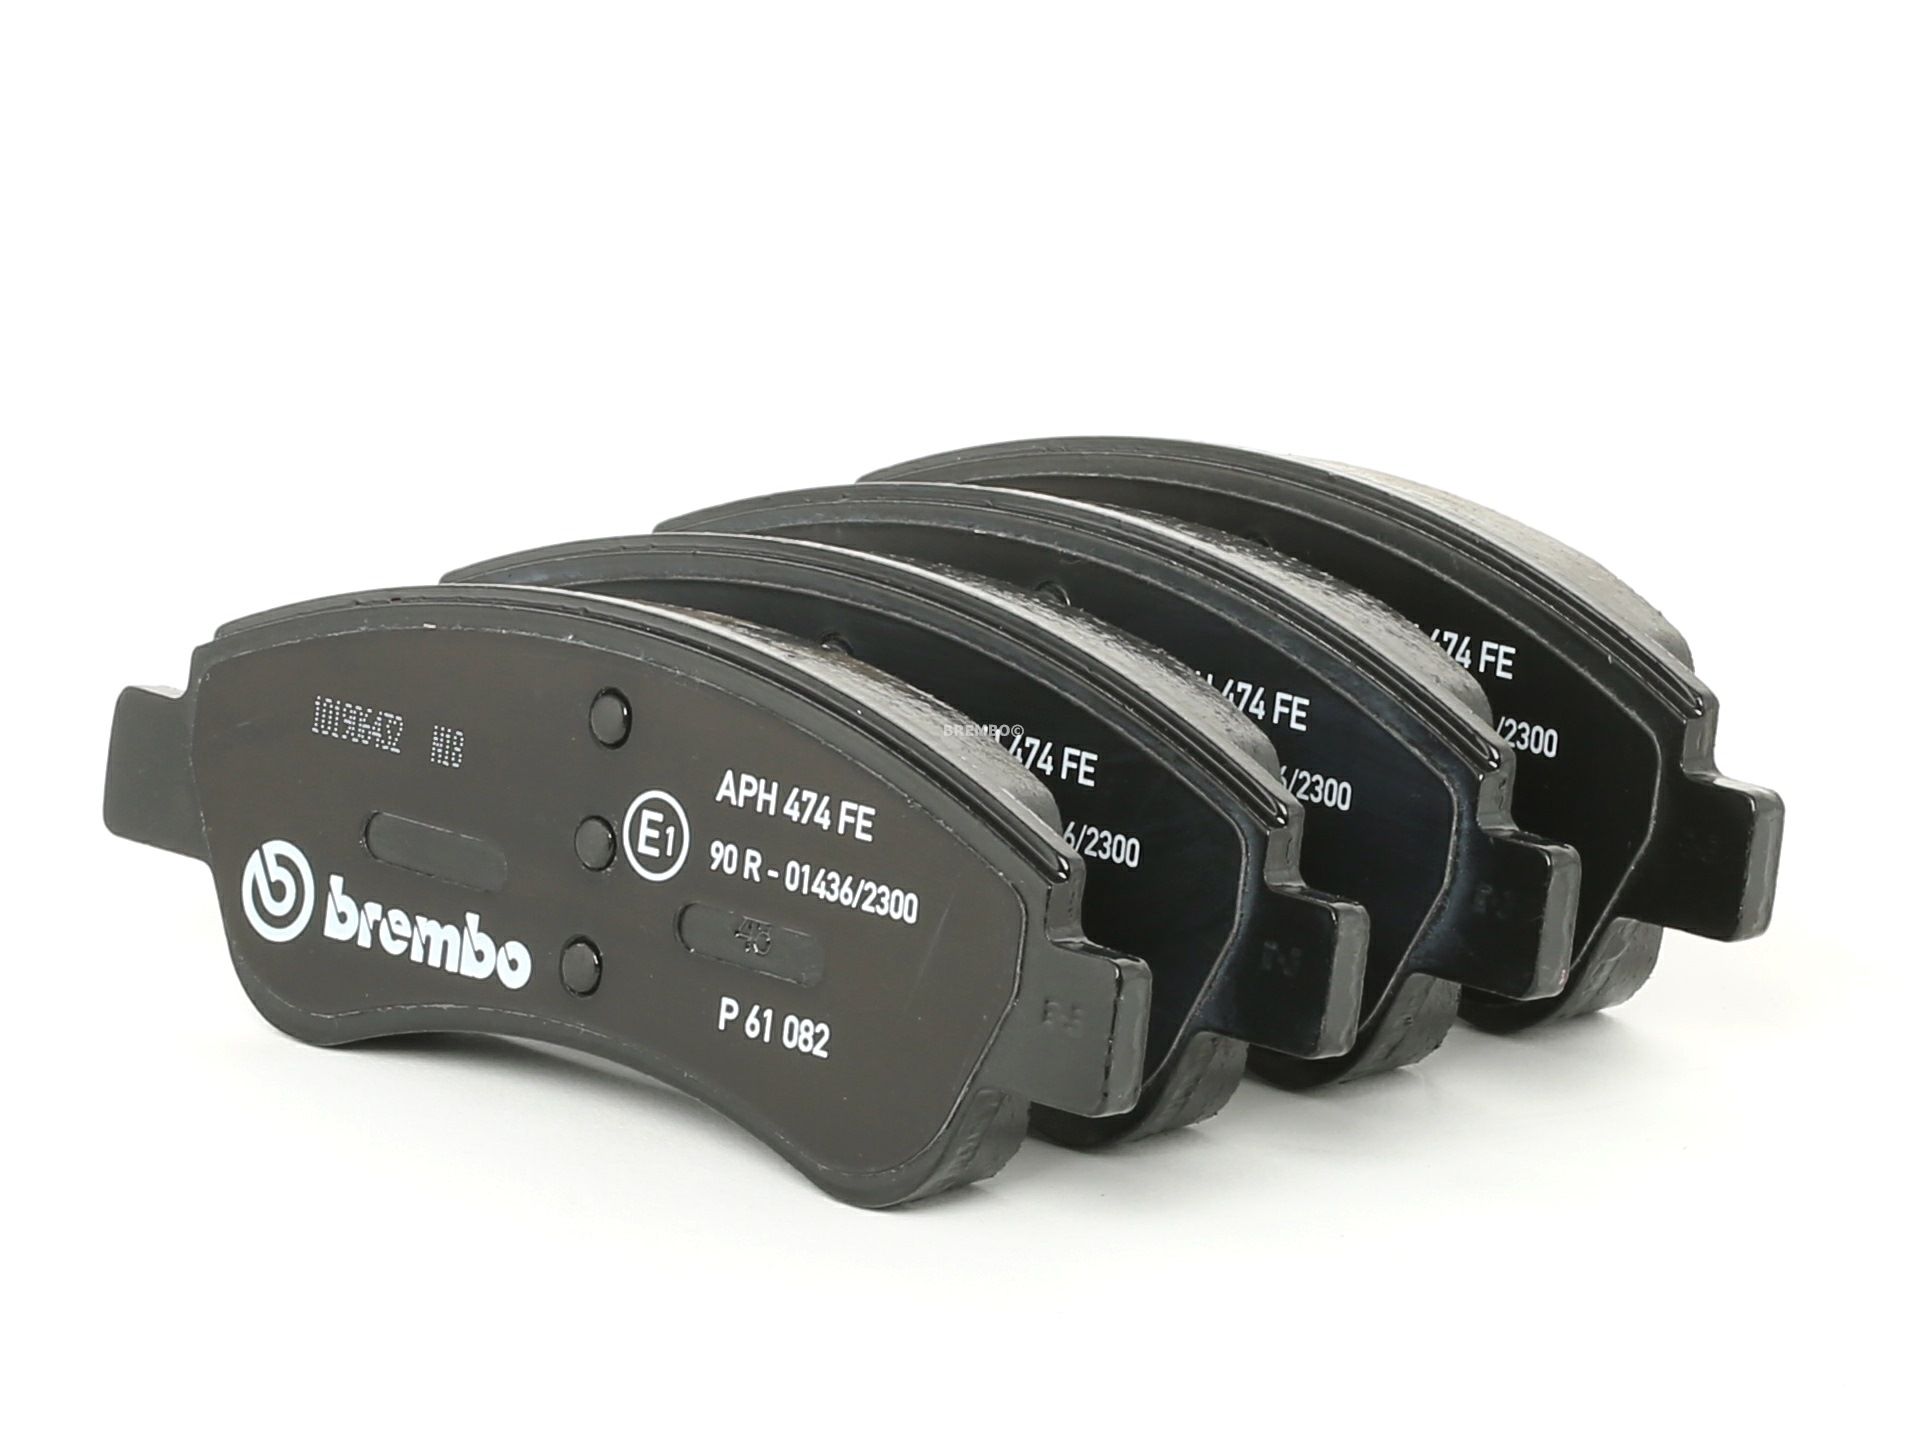 BREMBO P 61 082 Brake pad set excl. wear warning contact, with brake caliper screws, without accessories